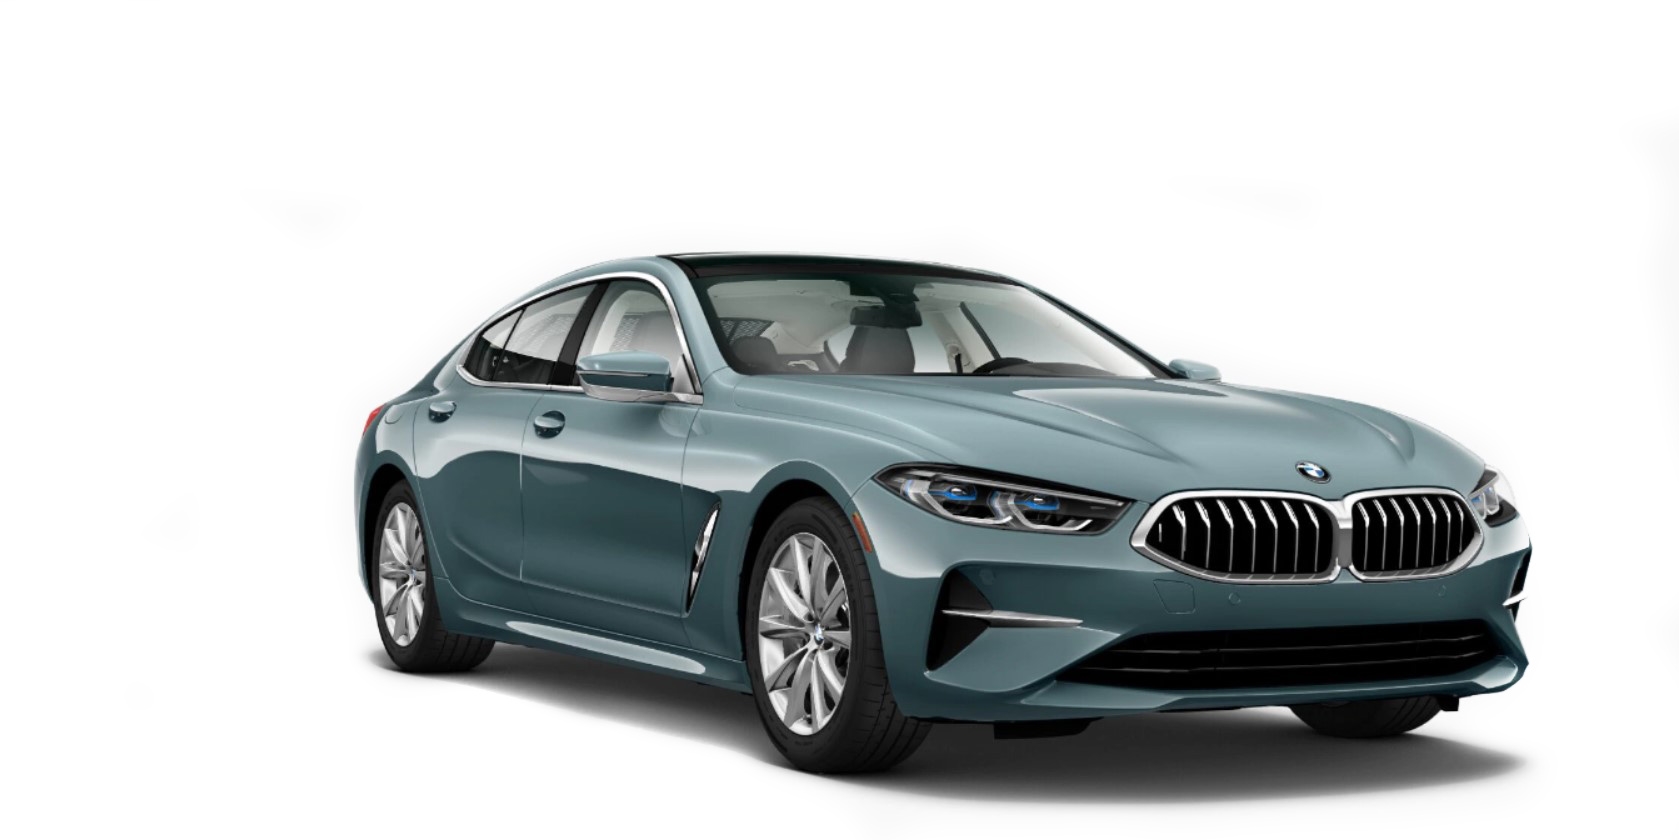 2020 BMW 840i xDrive Gran Coupe Full Specs, Features and Price | CarBuzz